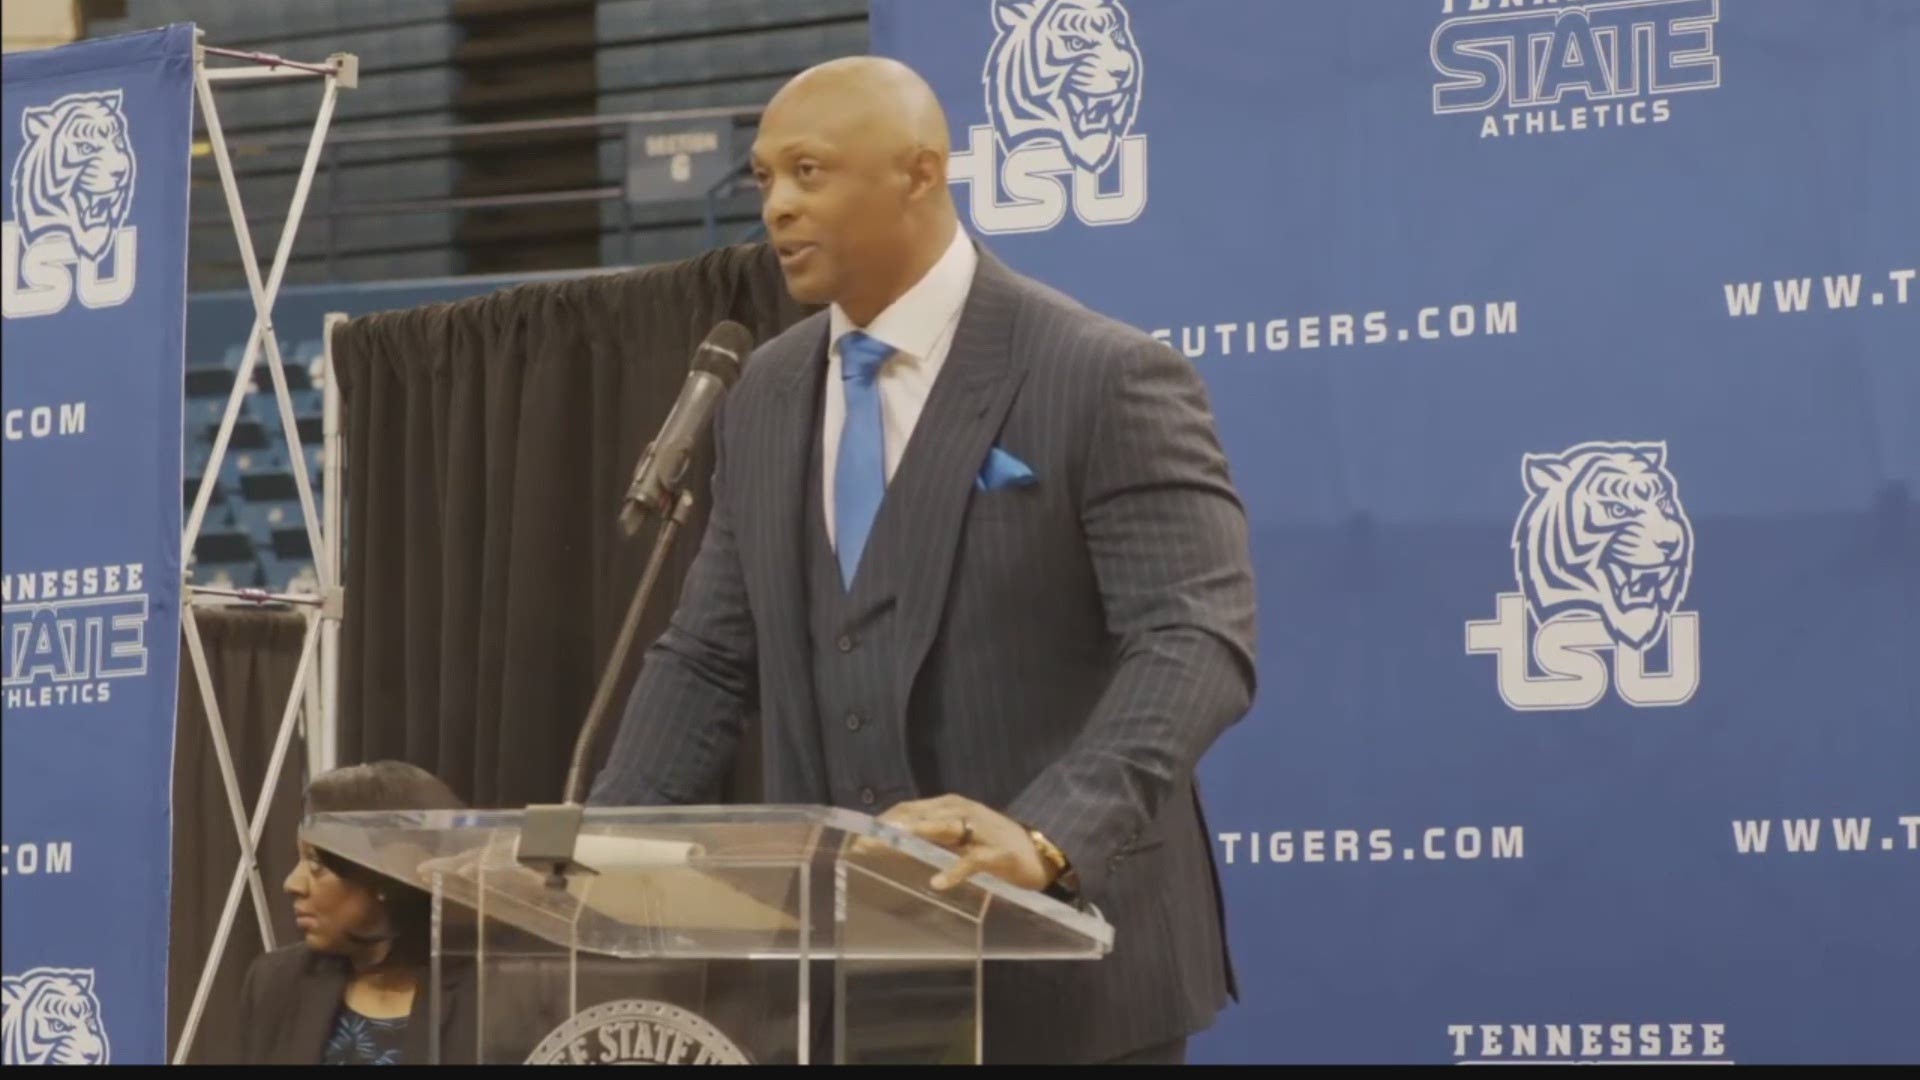 Tennessee State has hired former Titans running back Eddie George to lead their football program.